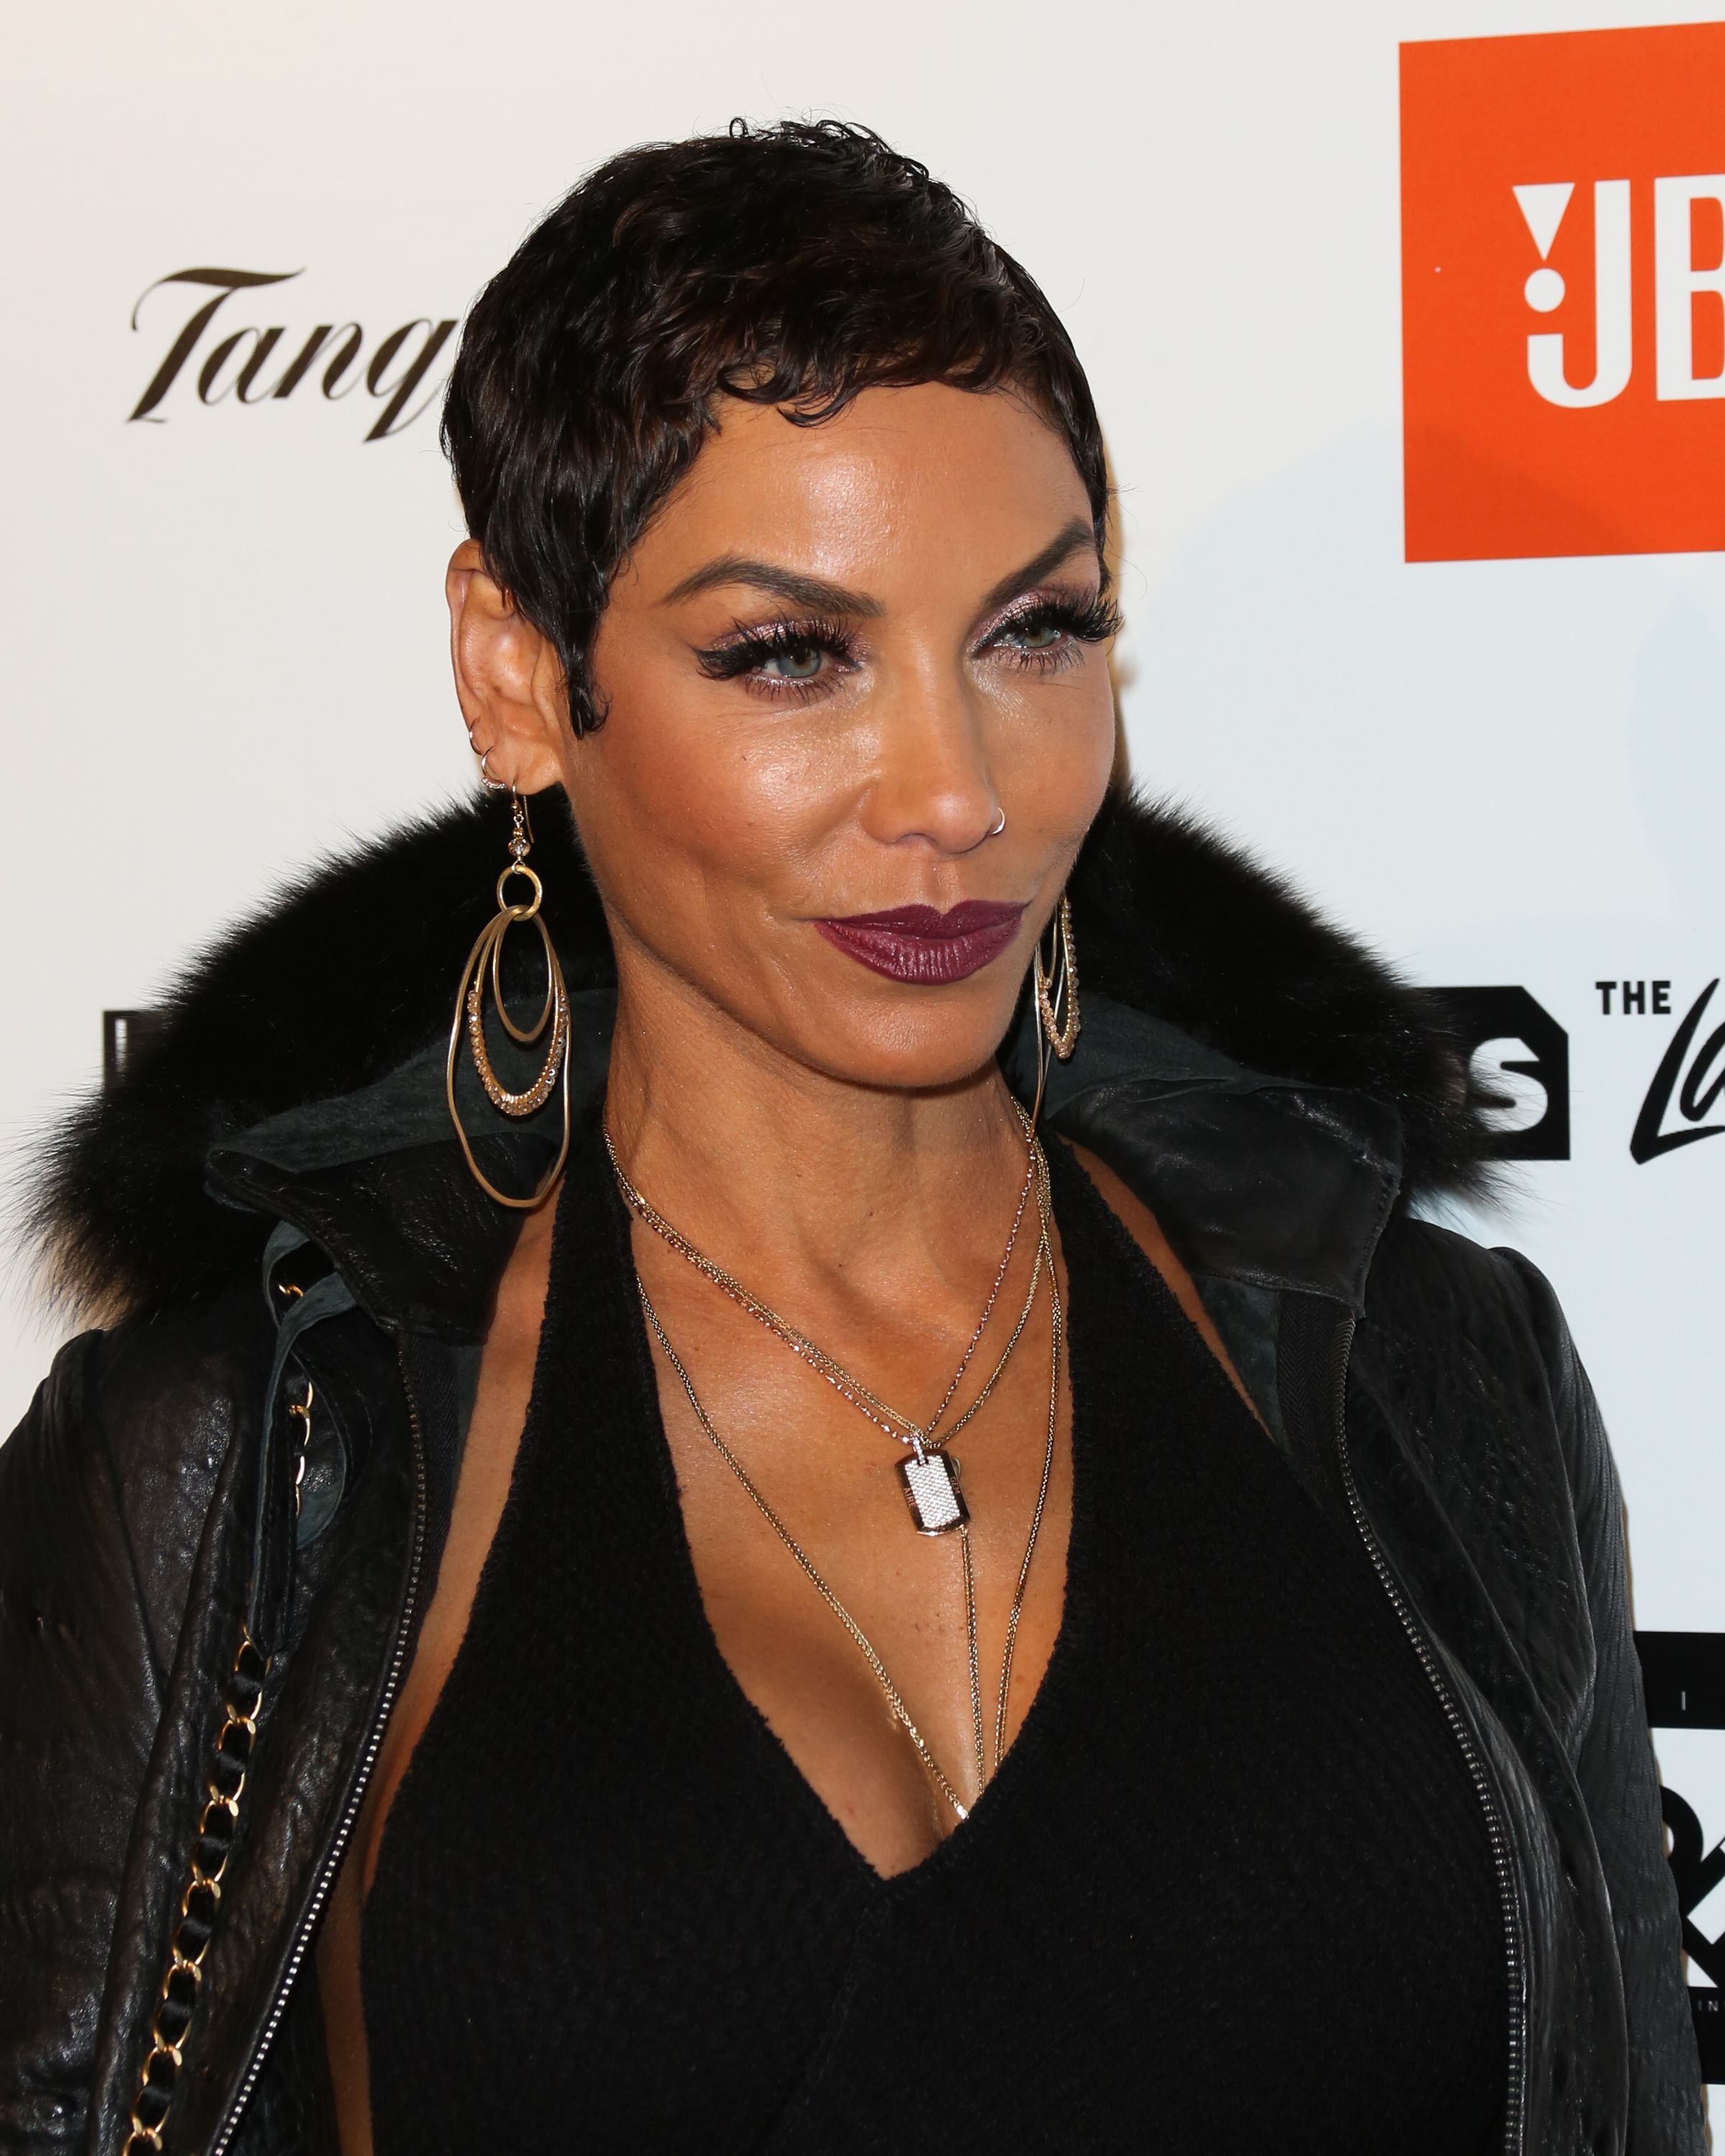 Nicole Murphy at Kenny 'The Jet' Smith's annual All-Star bash on Feb. 16, 2018 in California. | Photo: Getty Images